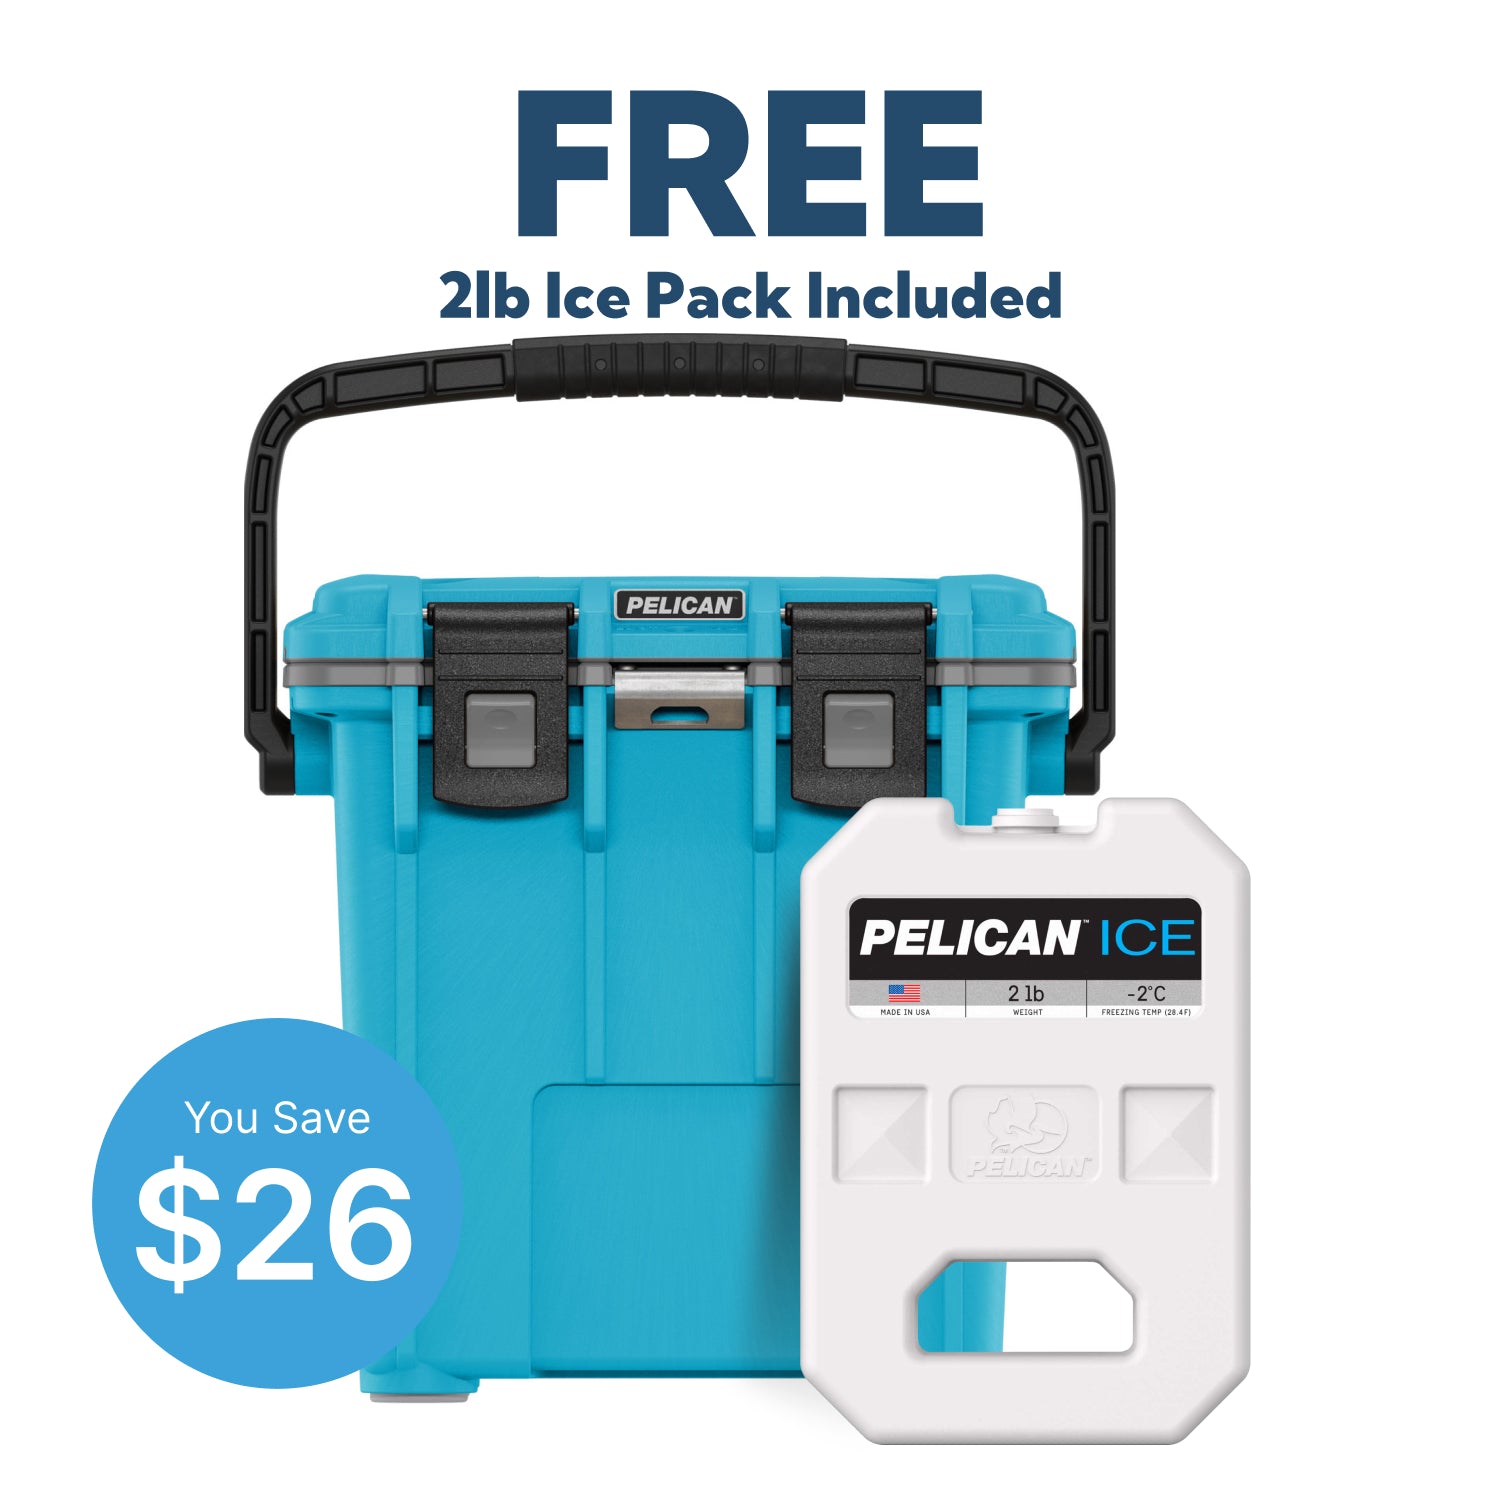 Cool Blue / Grey Pelican 20QT Cooler With Free 2lb Ice Pack